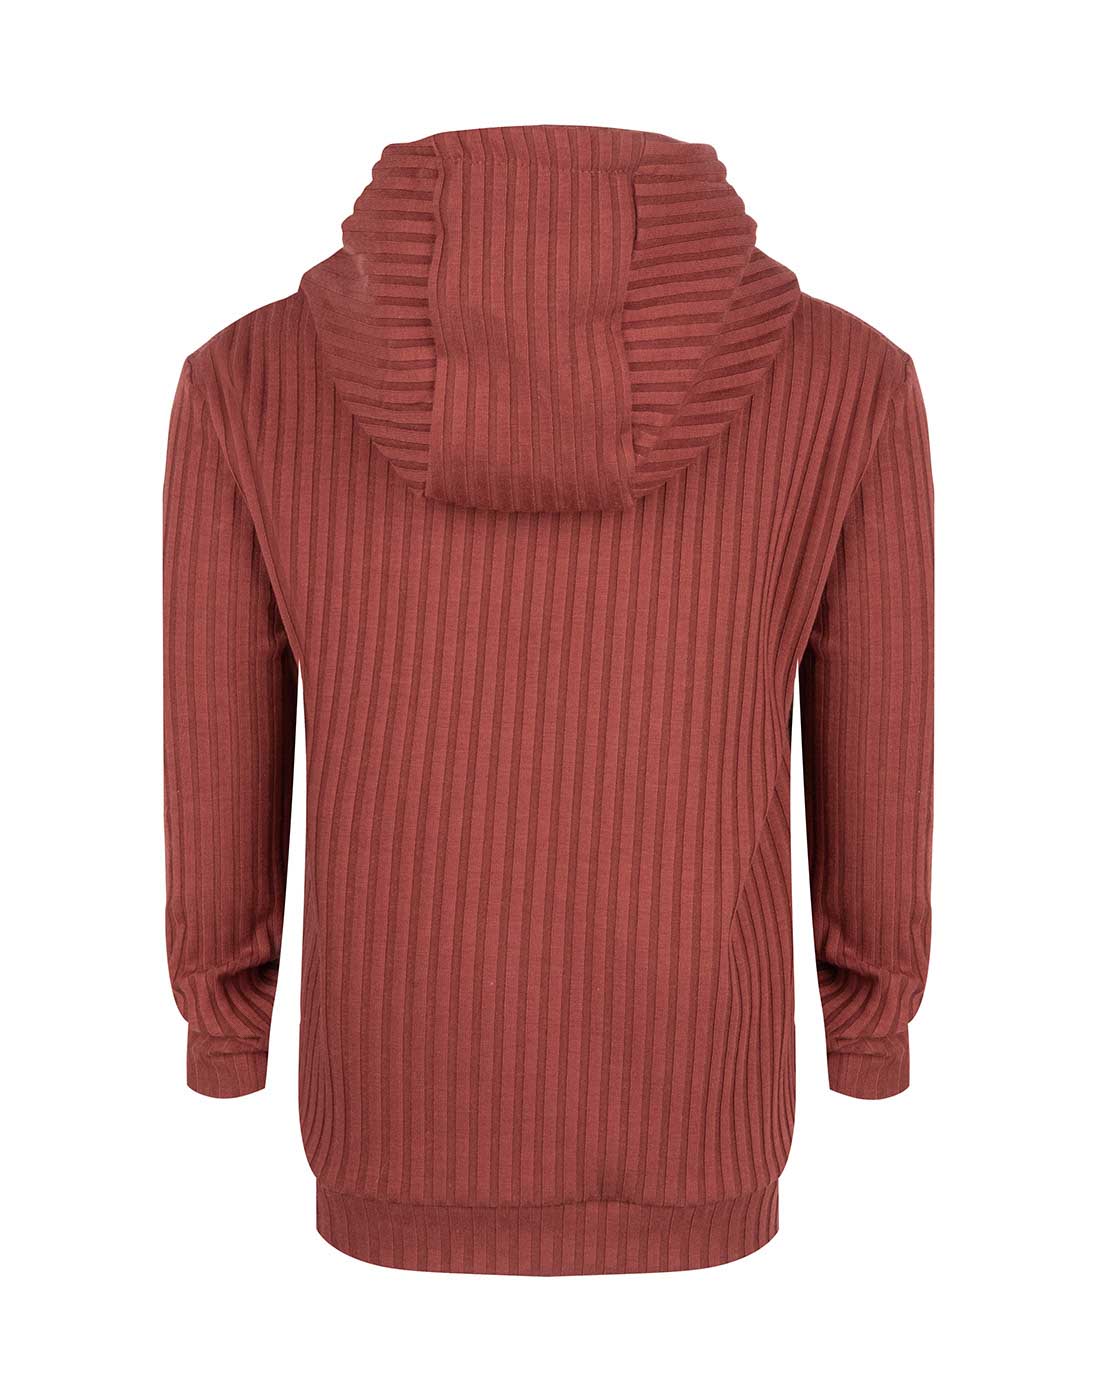 Daily7 Hooded Rib Sweater